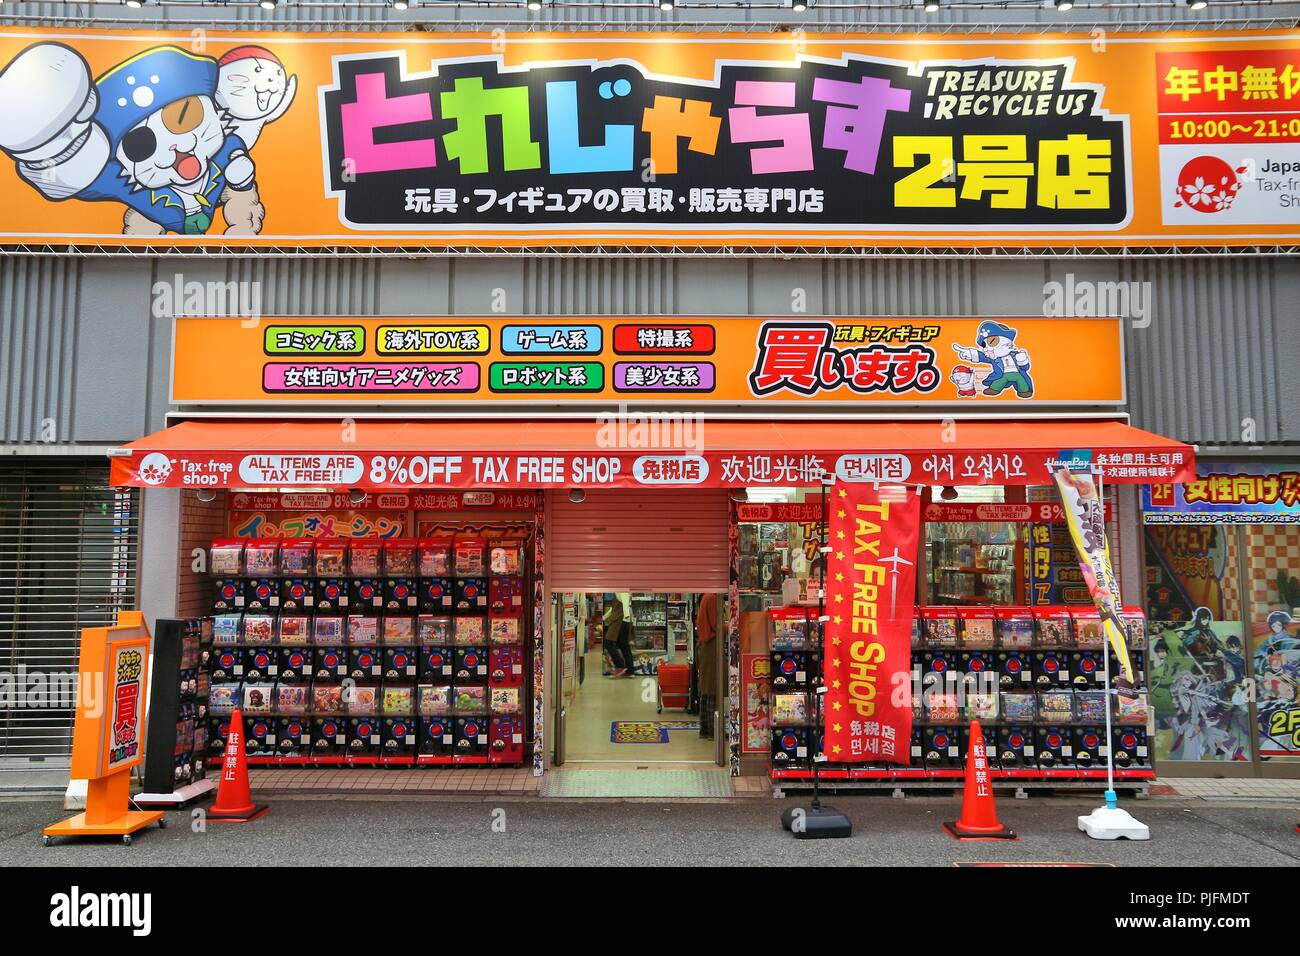 OSAKA, JAPAN - NOVEMBER 23, 2016: Toy store with capsule vending machines in Osaka. Japan is famous for its multitude of unusual vending machines. The Stock Photo